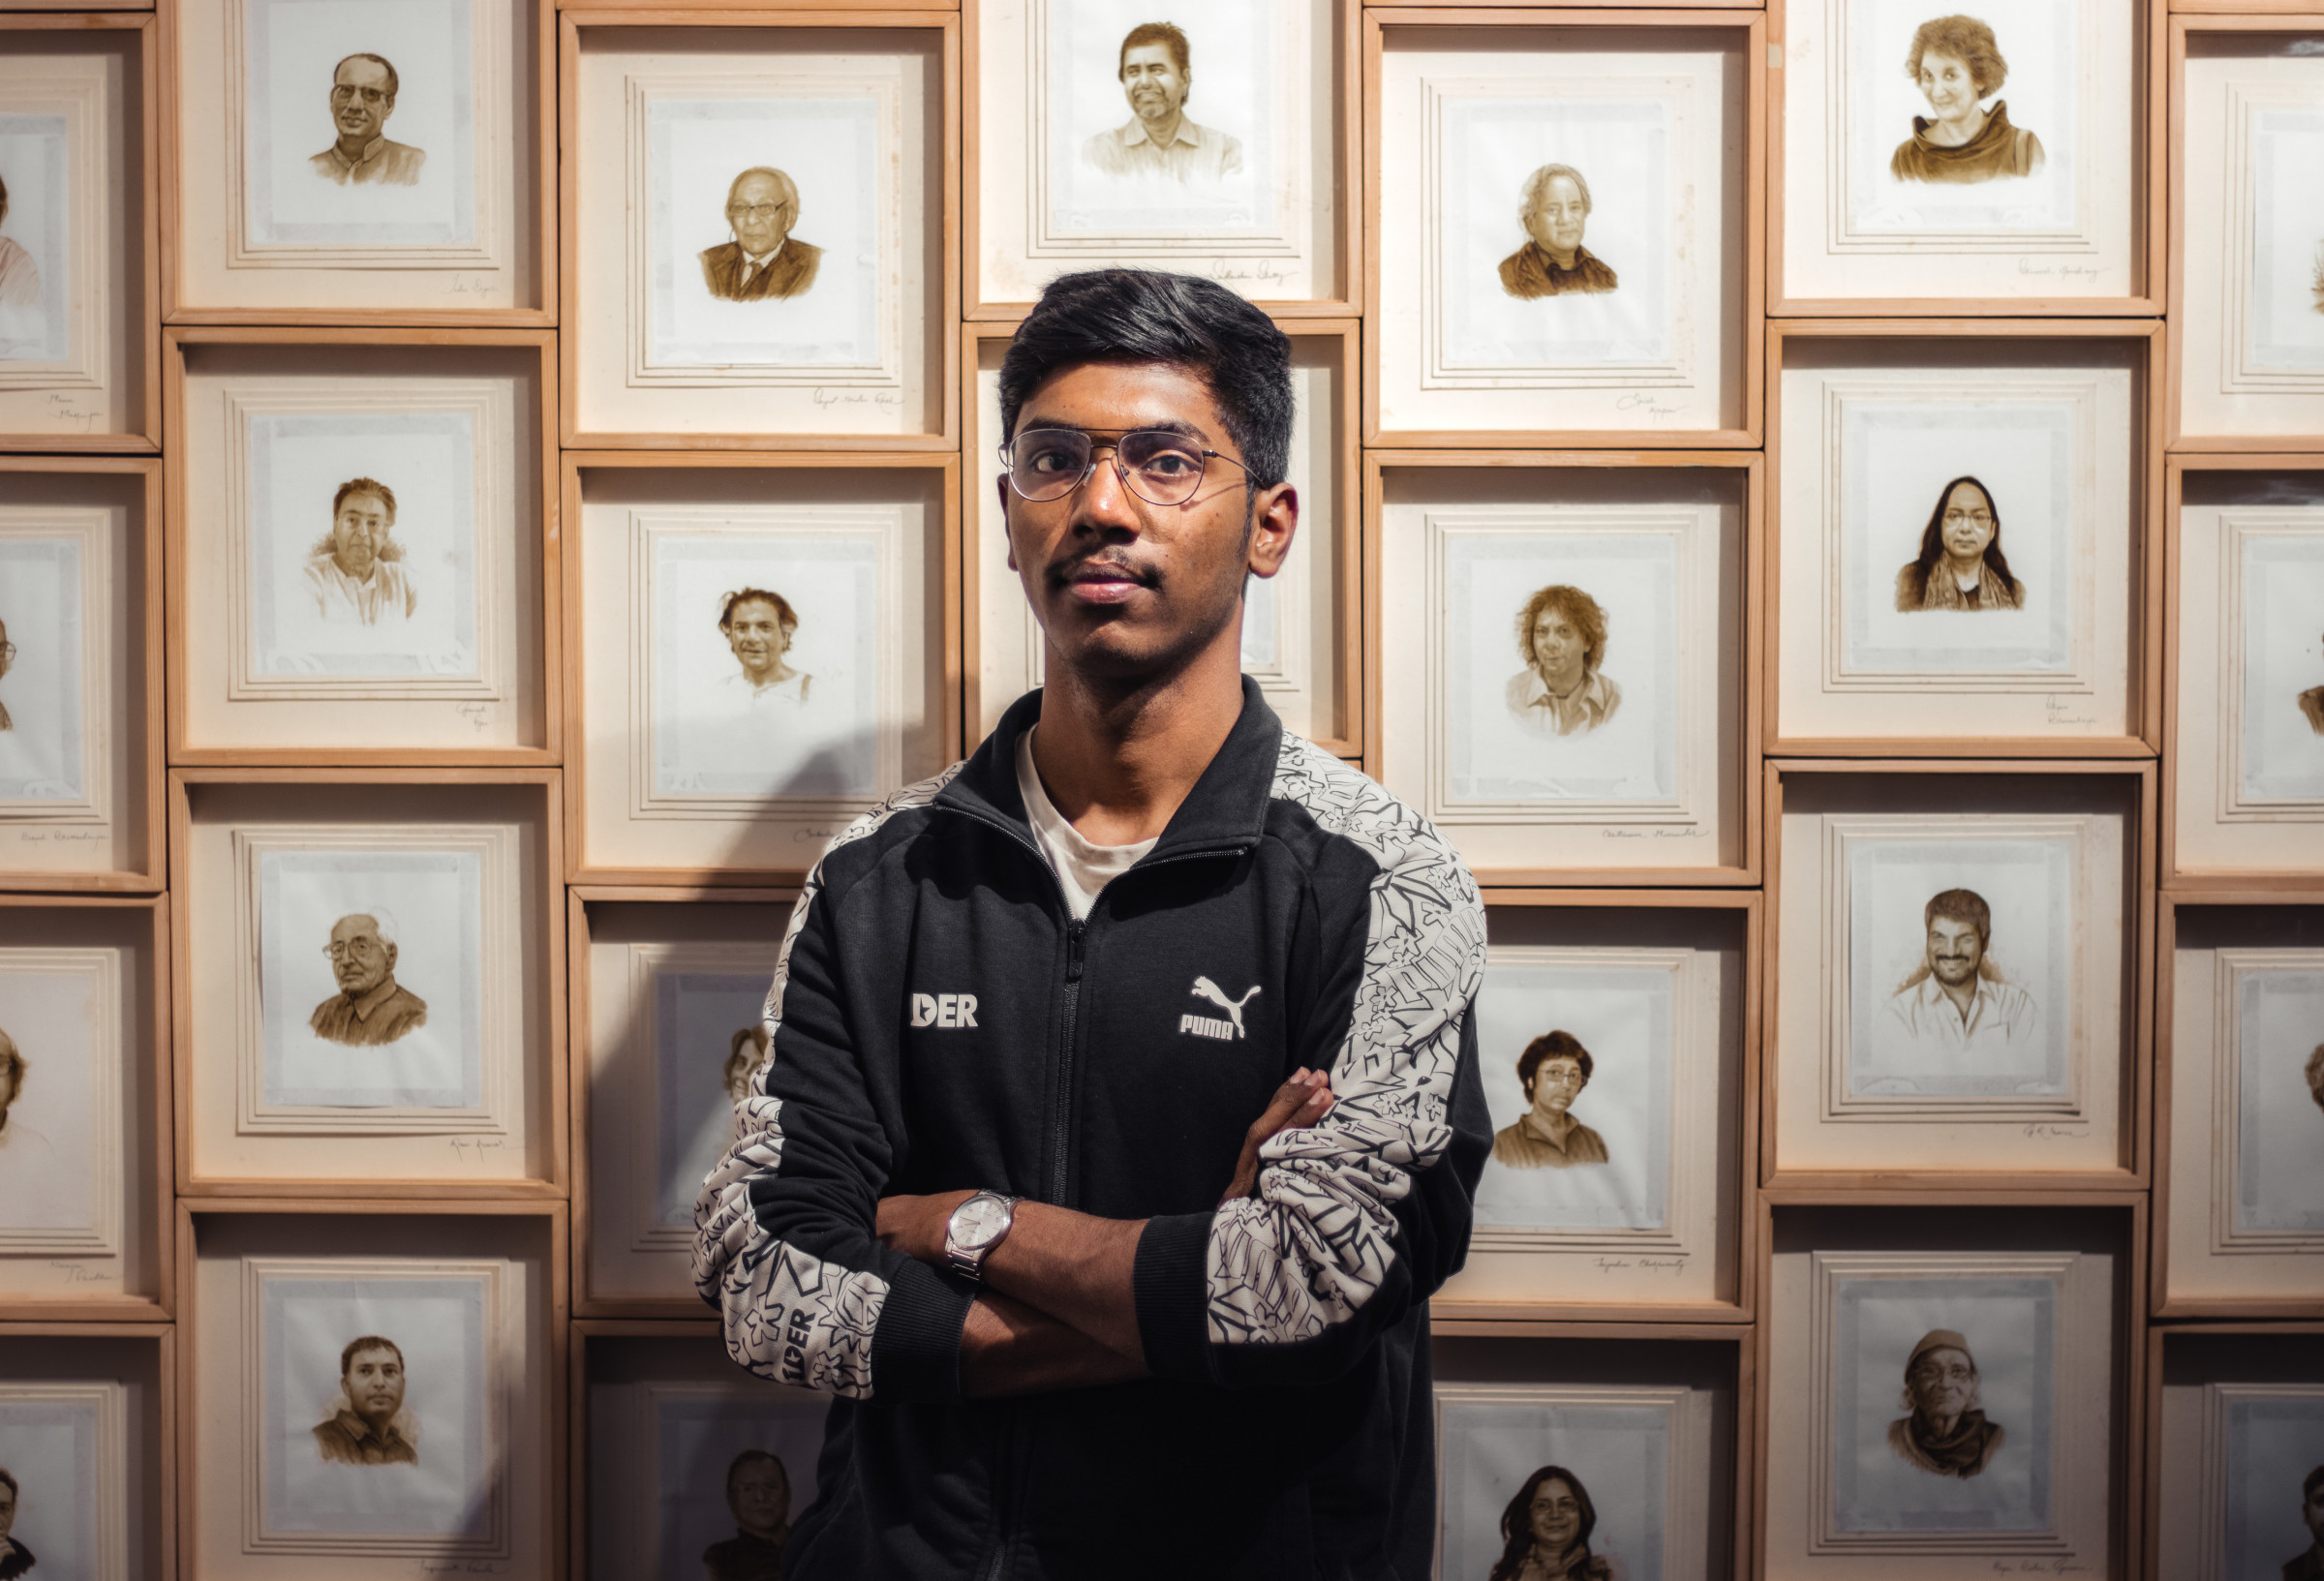 Author Rohan in a black-and-white Puma jacket with his arms crossed standing in front of a gallery wall of portraits